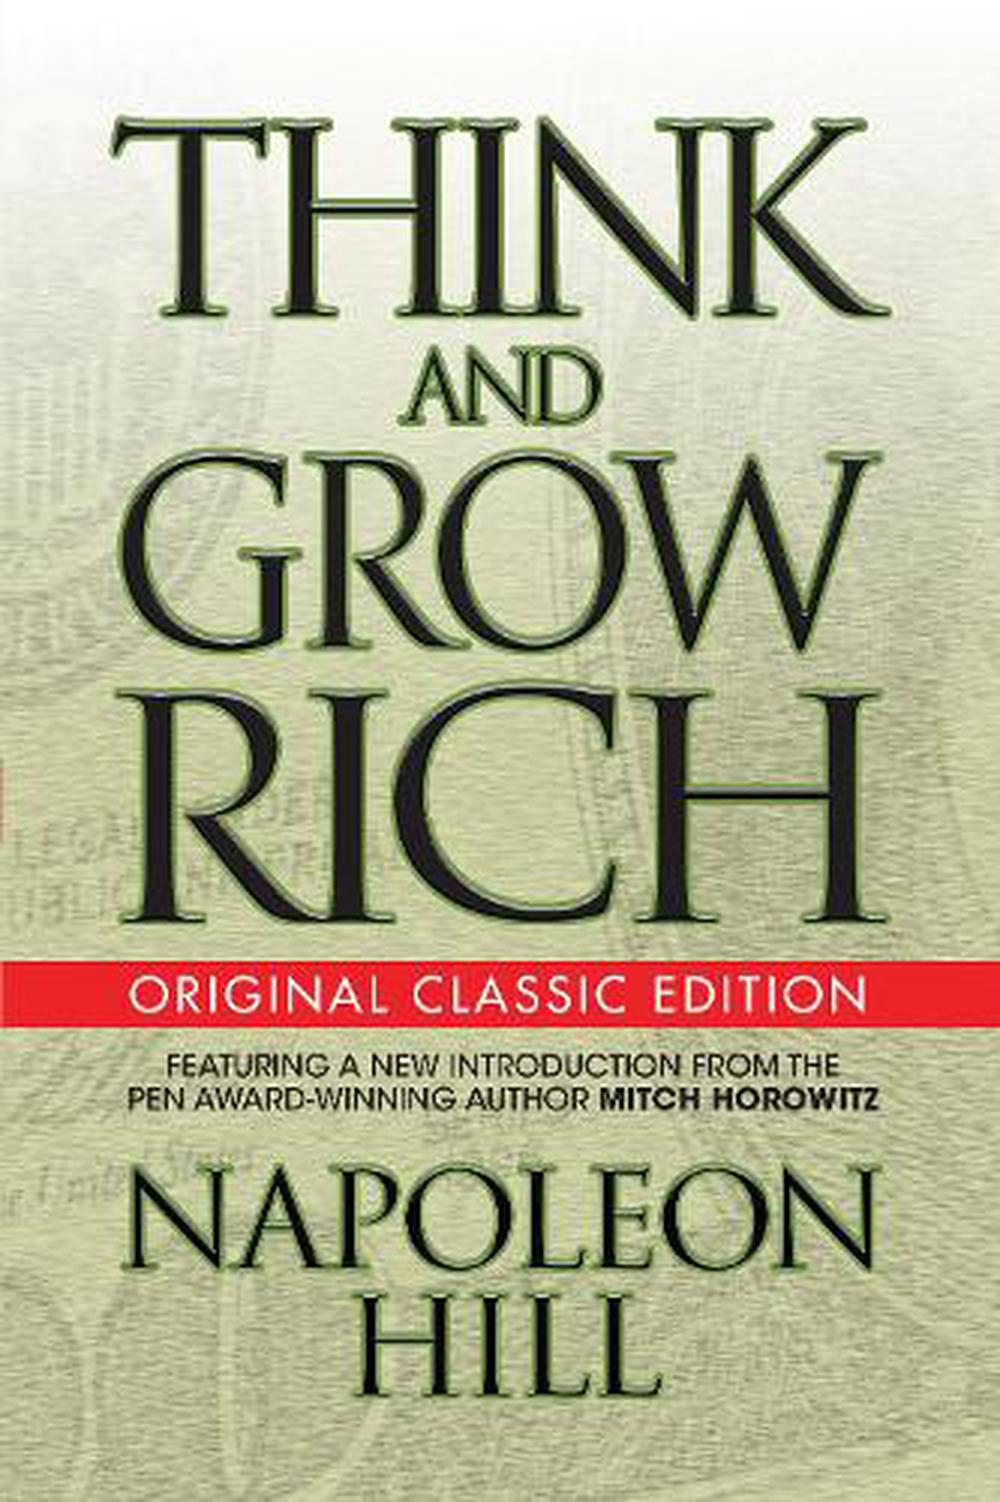 book review of think and grow rich by napoleon hill